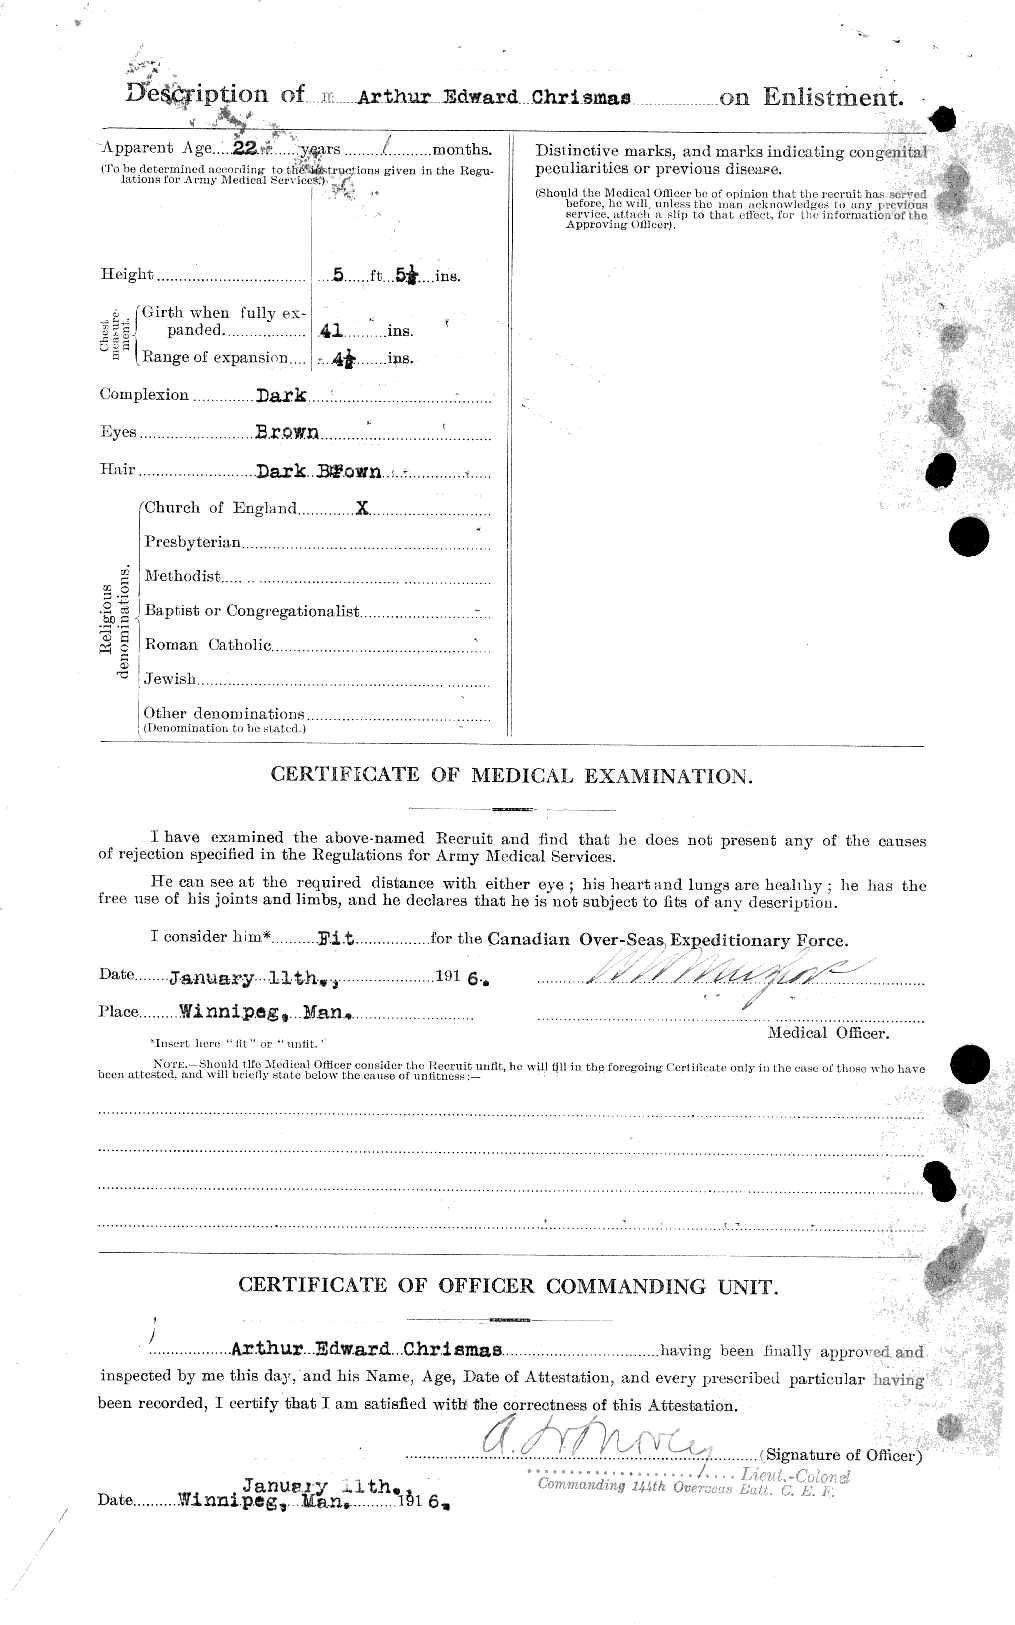 Personnel Records of the First World War - CEF 022137b